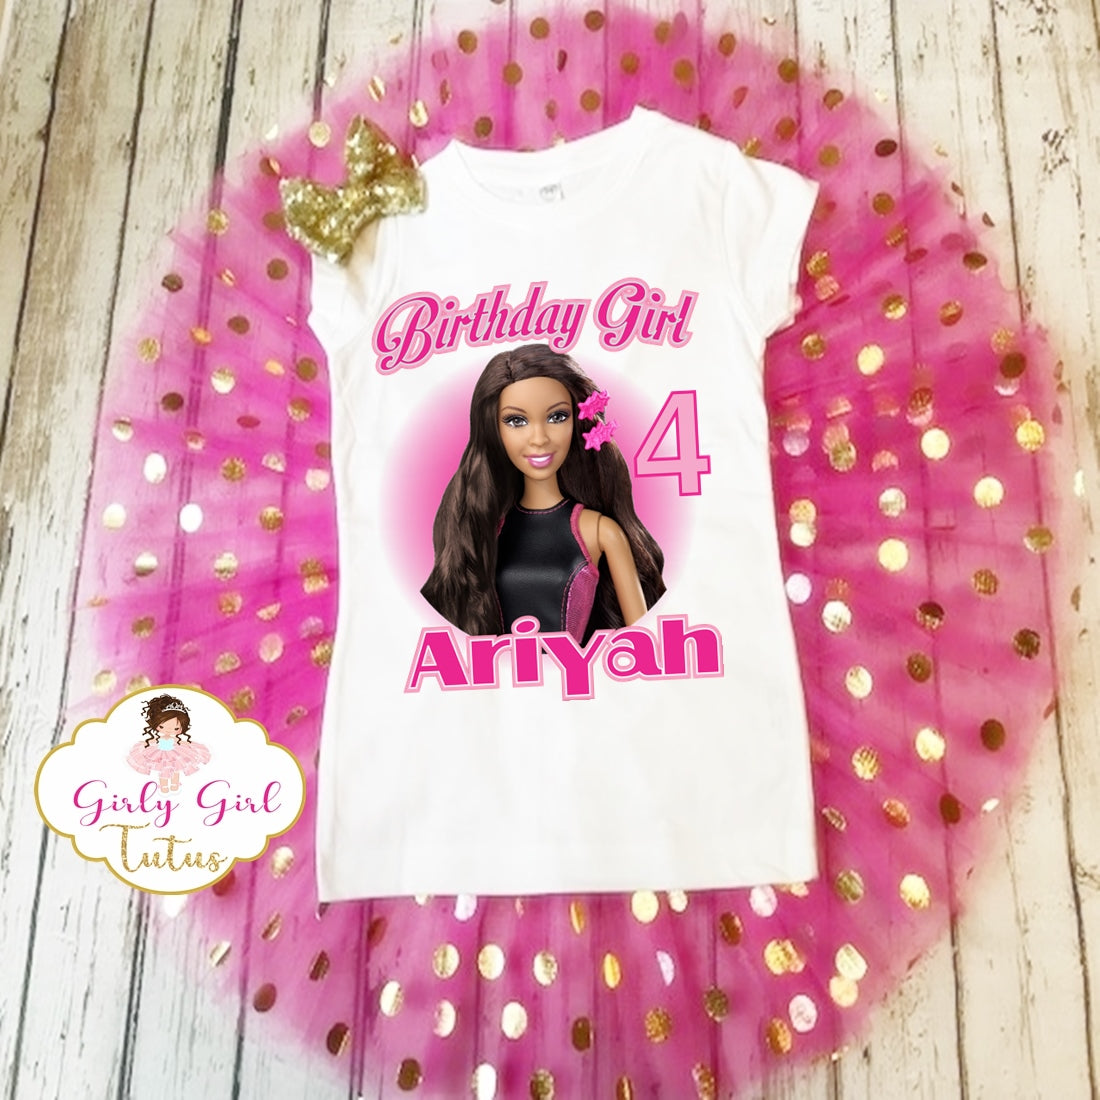 barbie birthday outfit